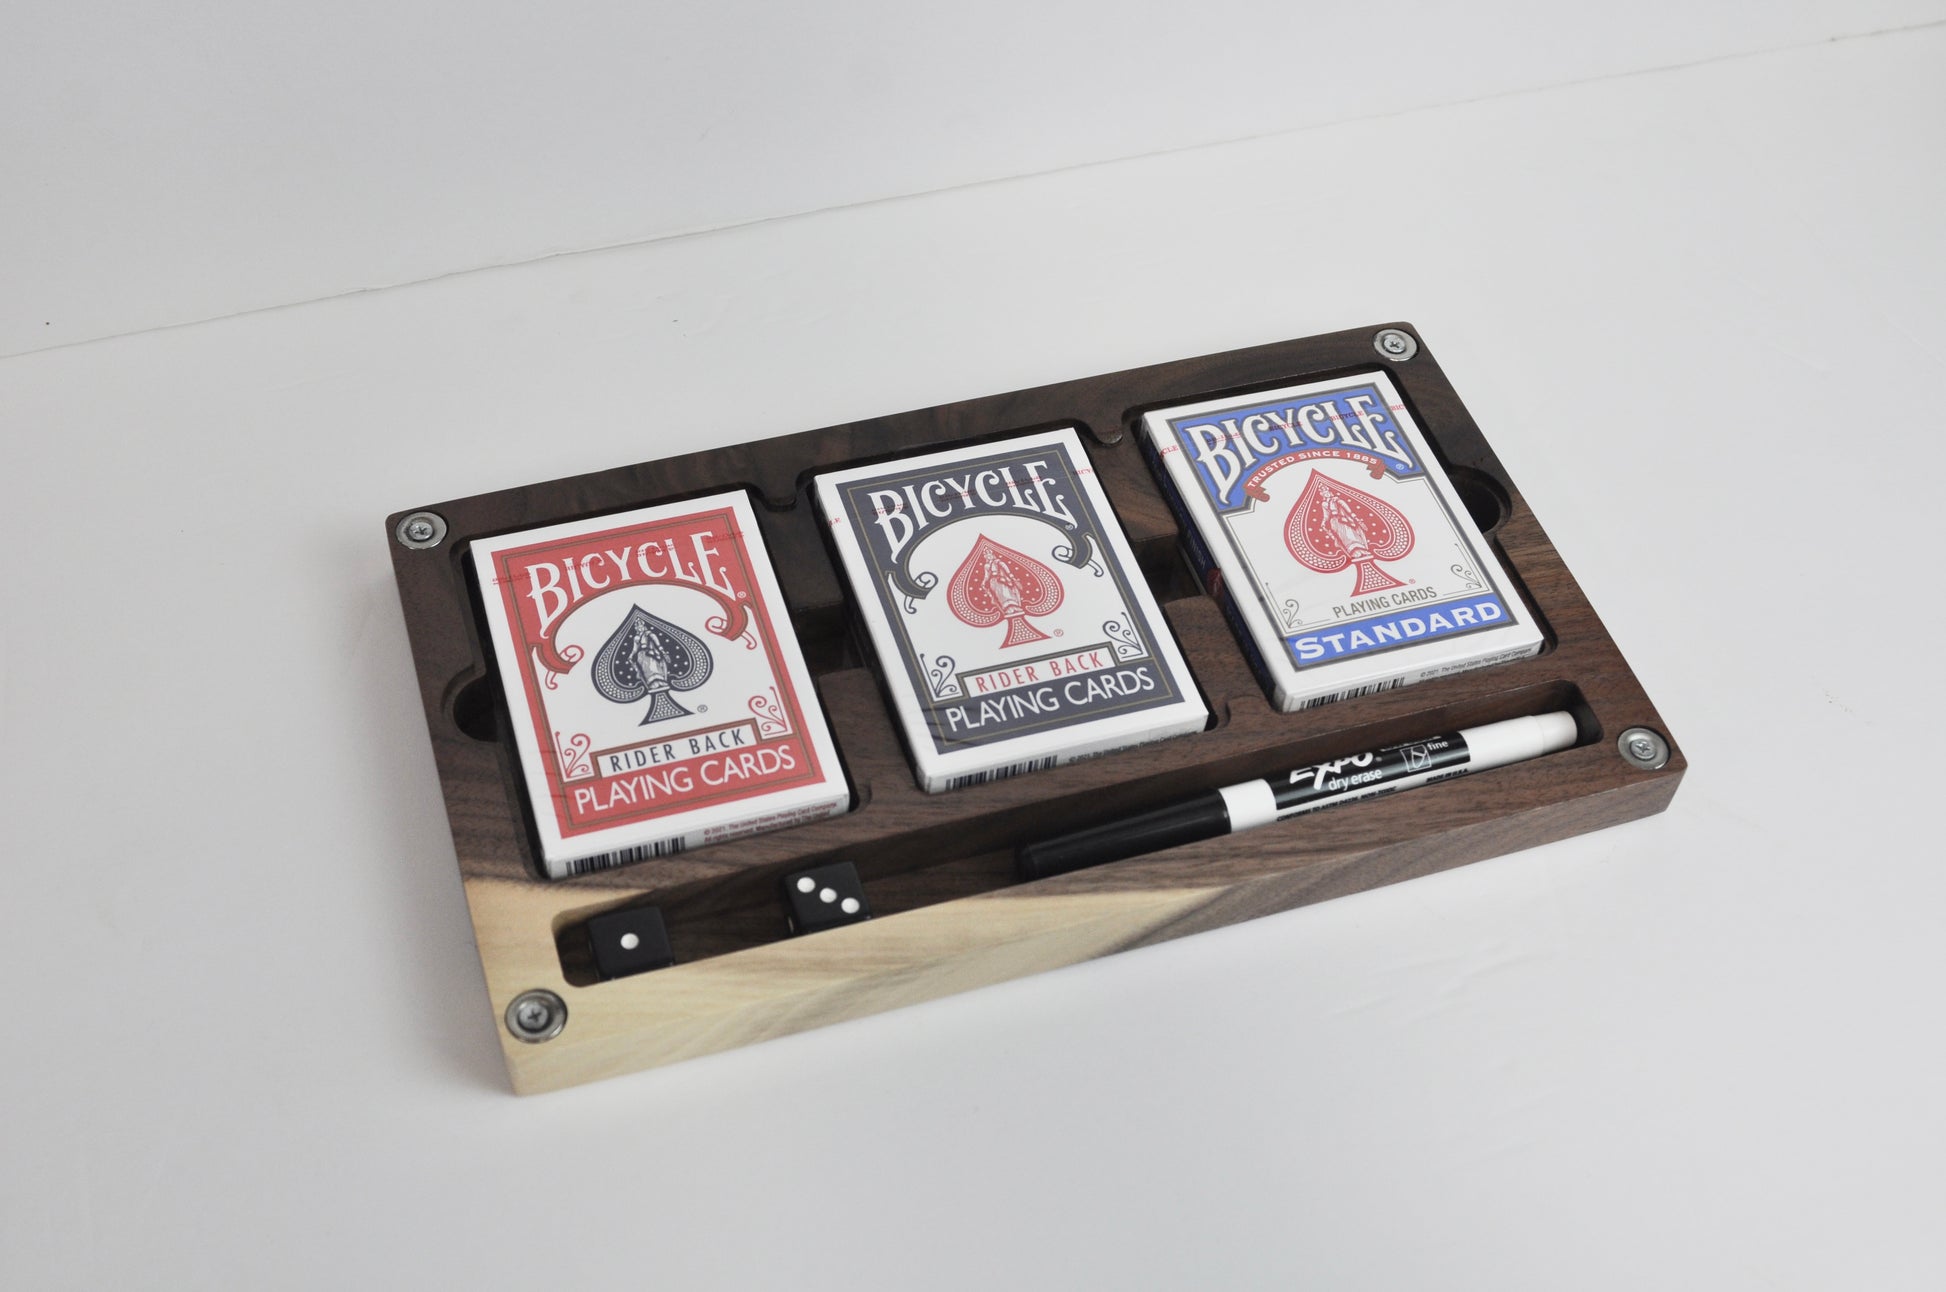 Personalised Playing Cards Box & Cards Engraved With a 